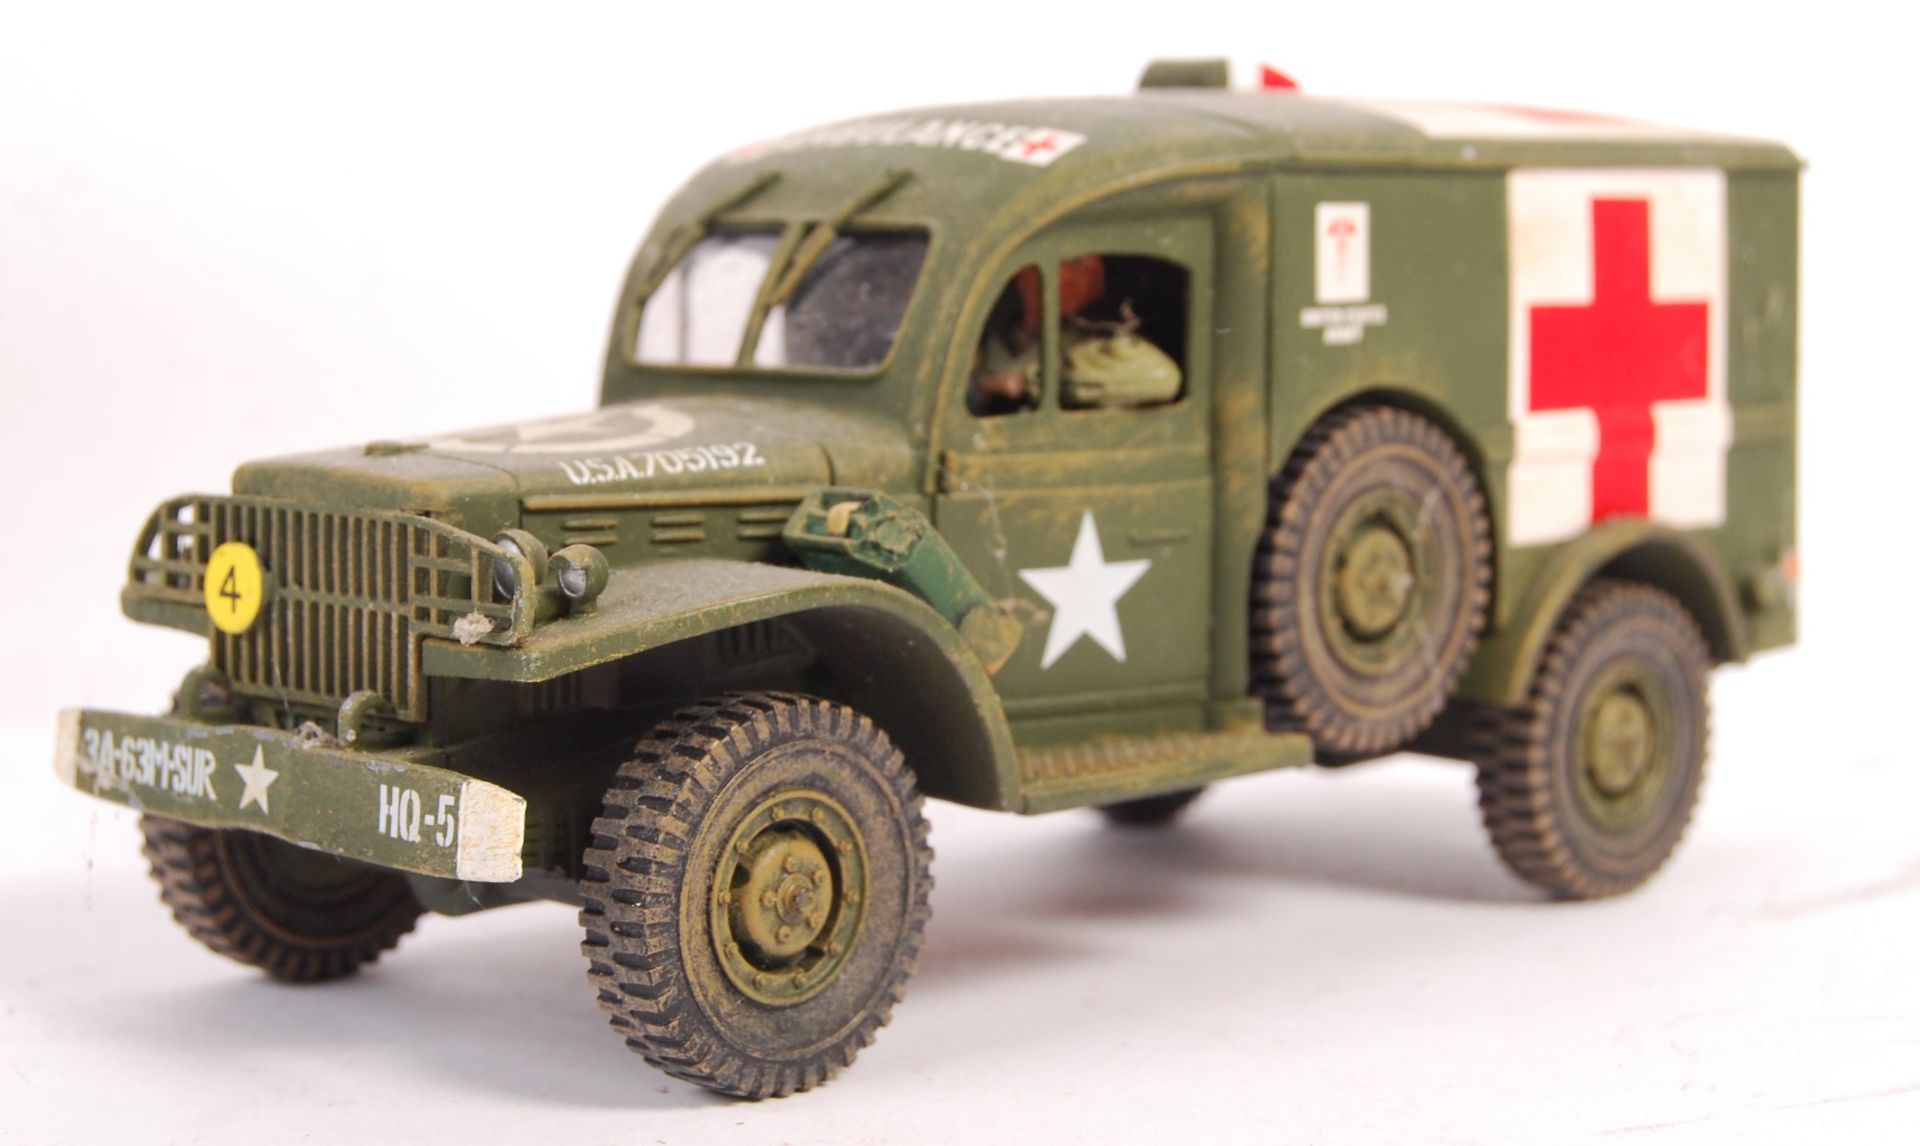 KING & COUNTRY BOXED 1:30 SCALE MODEL BATTLE OF THE BULGE VEHICLE - Bild 2 aus 6